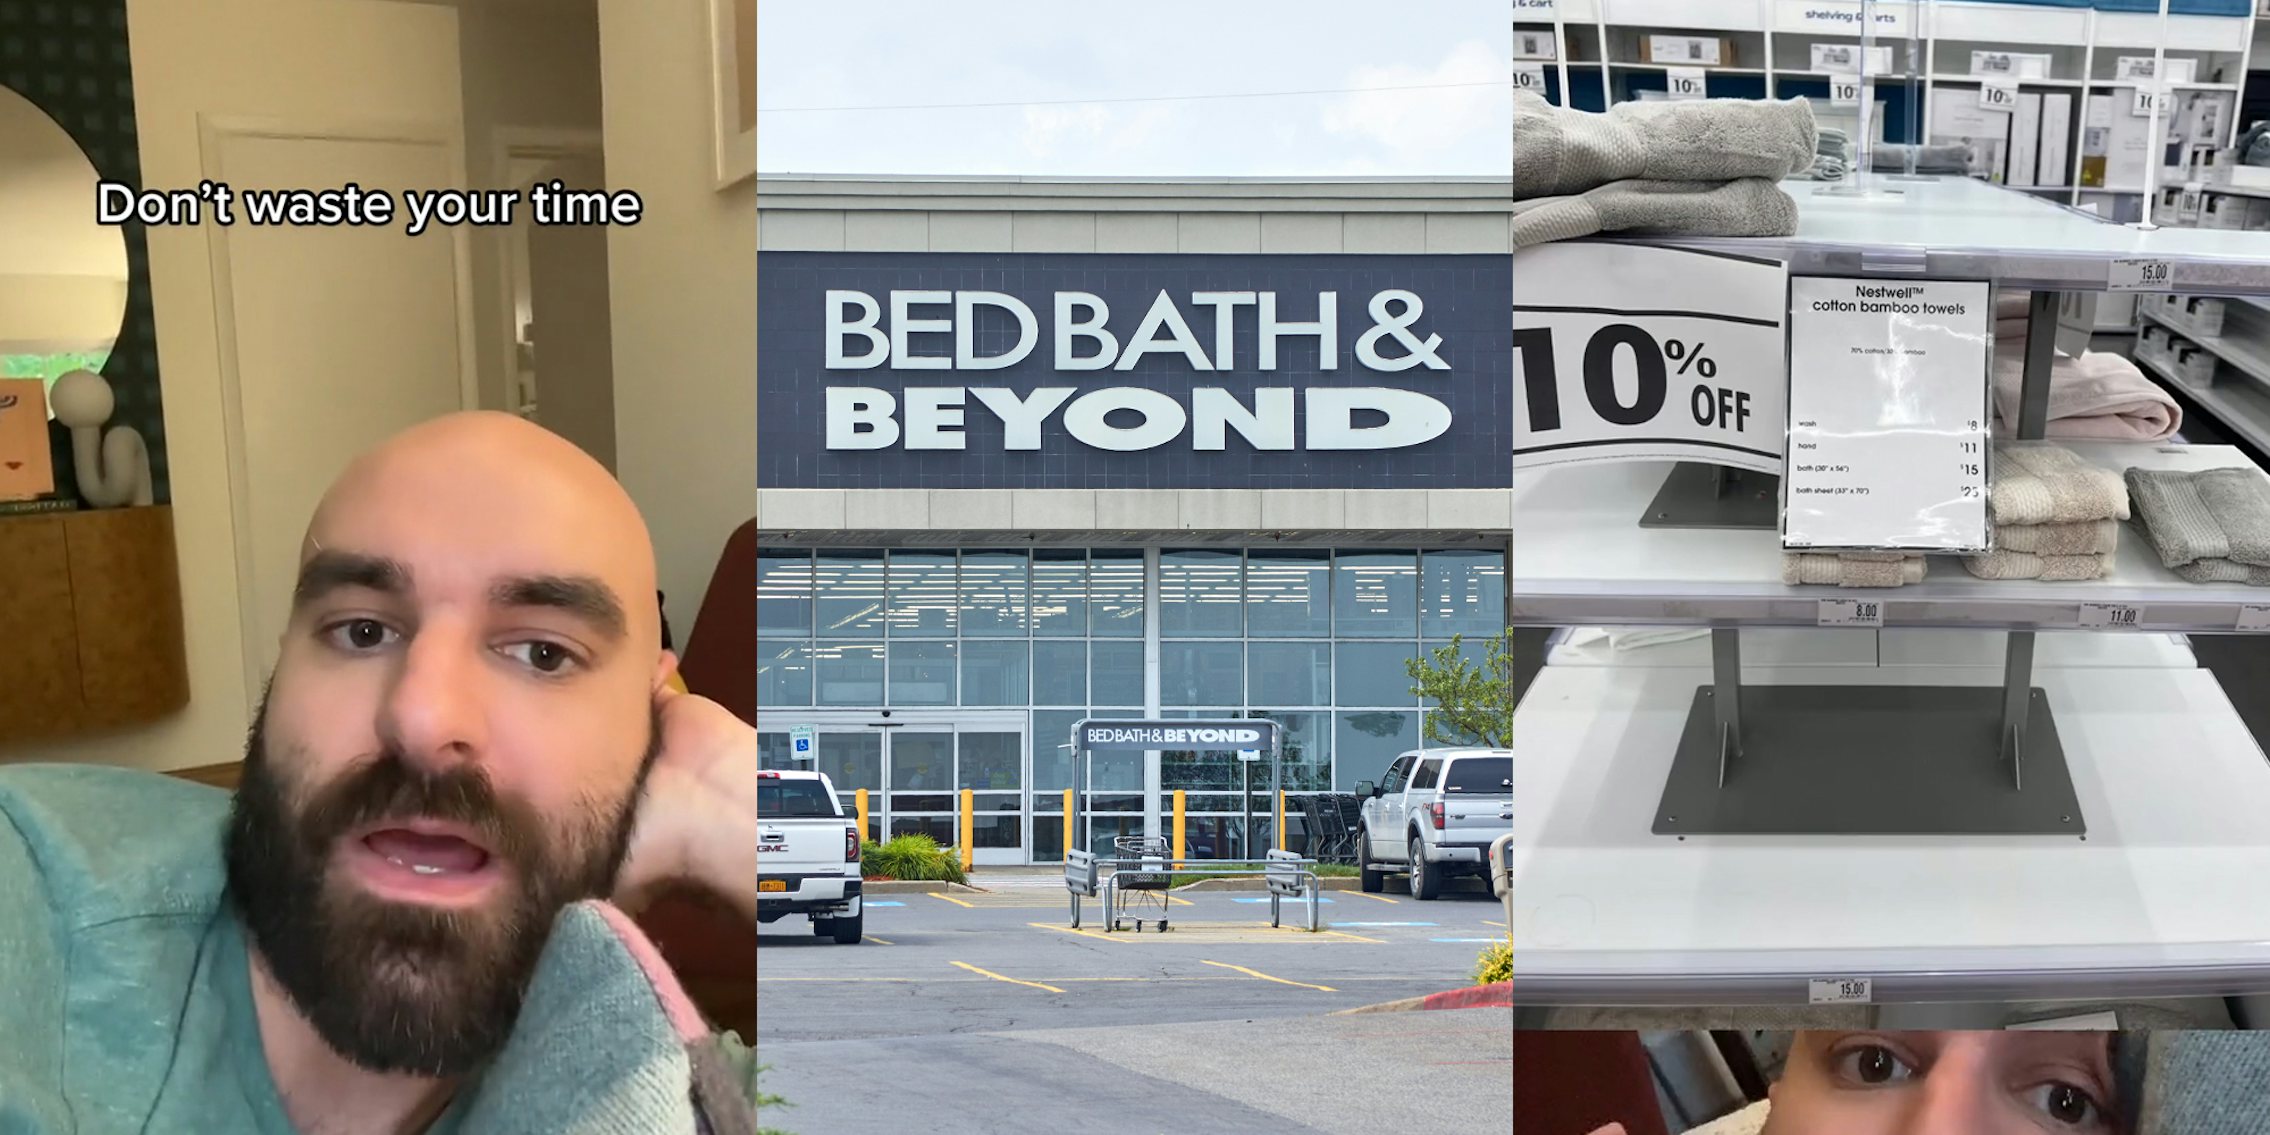 Bed Bath and Beyond customer speaking with caption 'Don't waste your time' (l) Bed Bath and Beyond building with sign (c) Bed Bath and Beyond image of sale with 10% off paper (r)